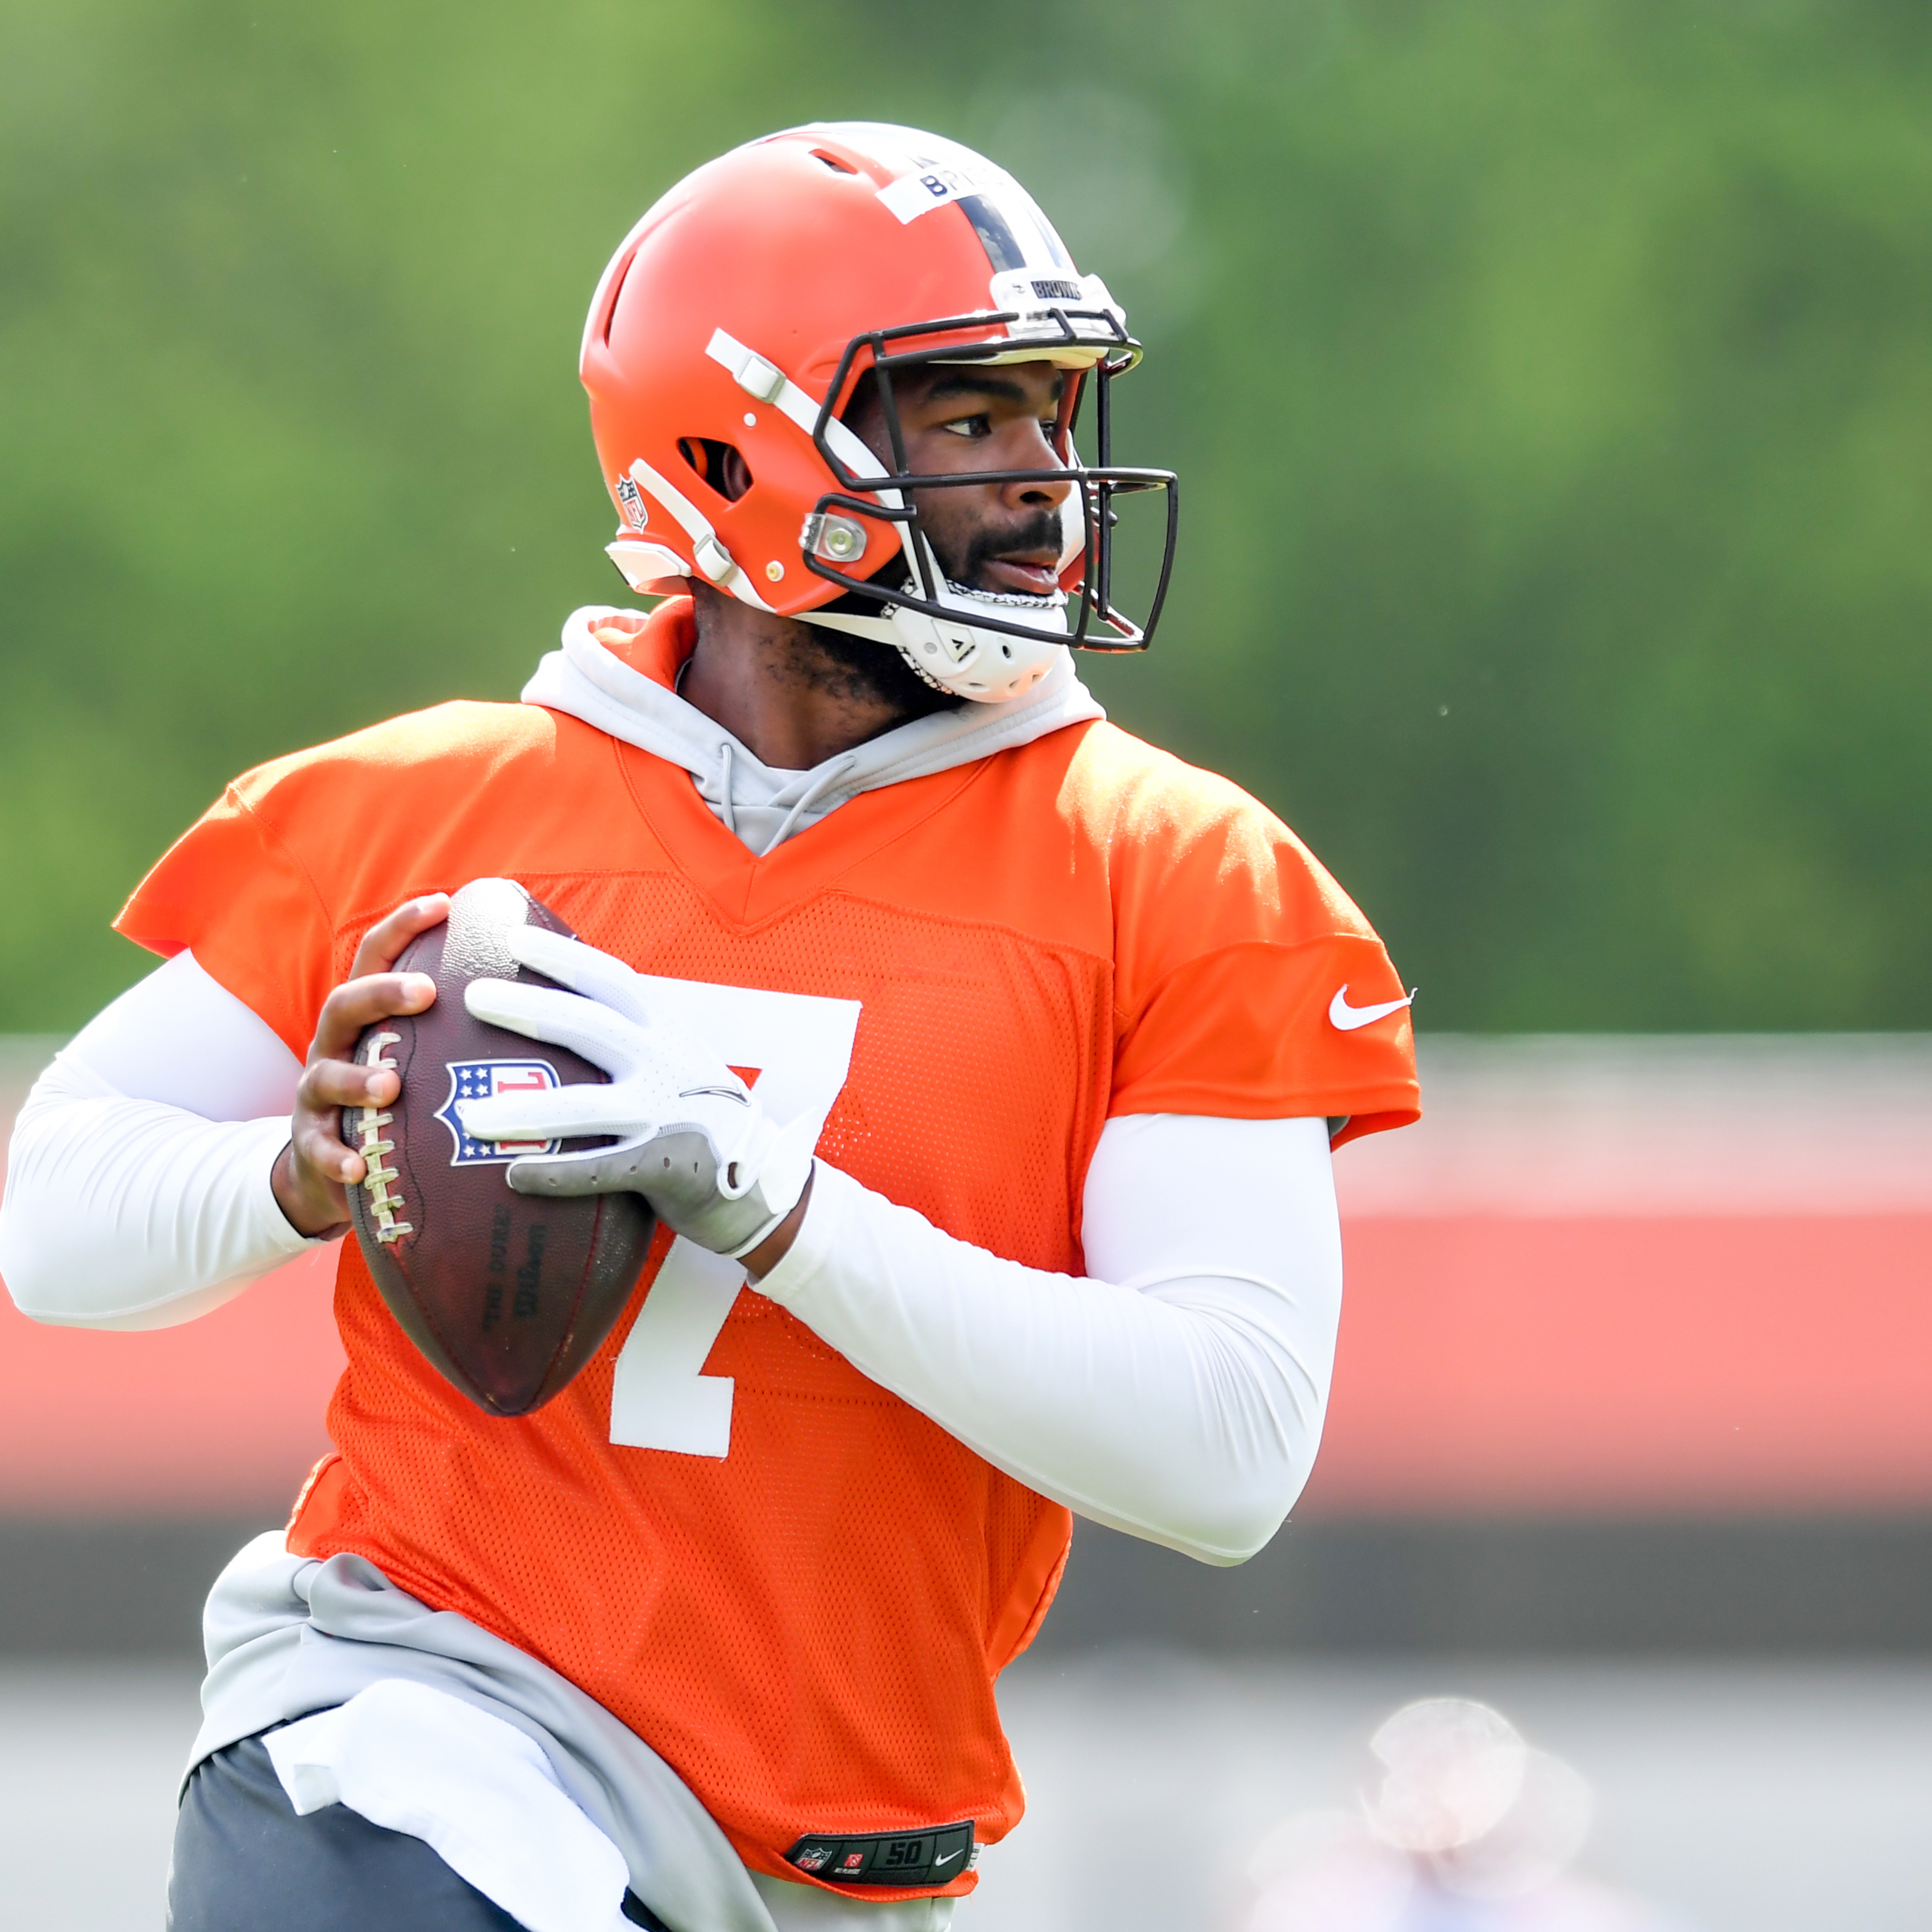 ESPN: Jacoby Brissett, Not Baker Mayfield, Would Be Browns’ QB1 If Watson Suspended